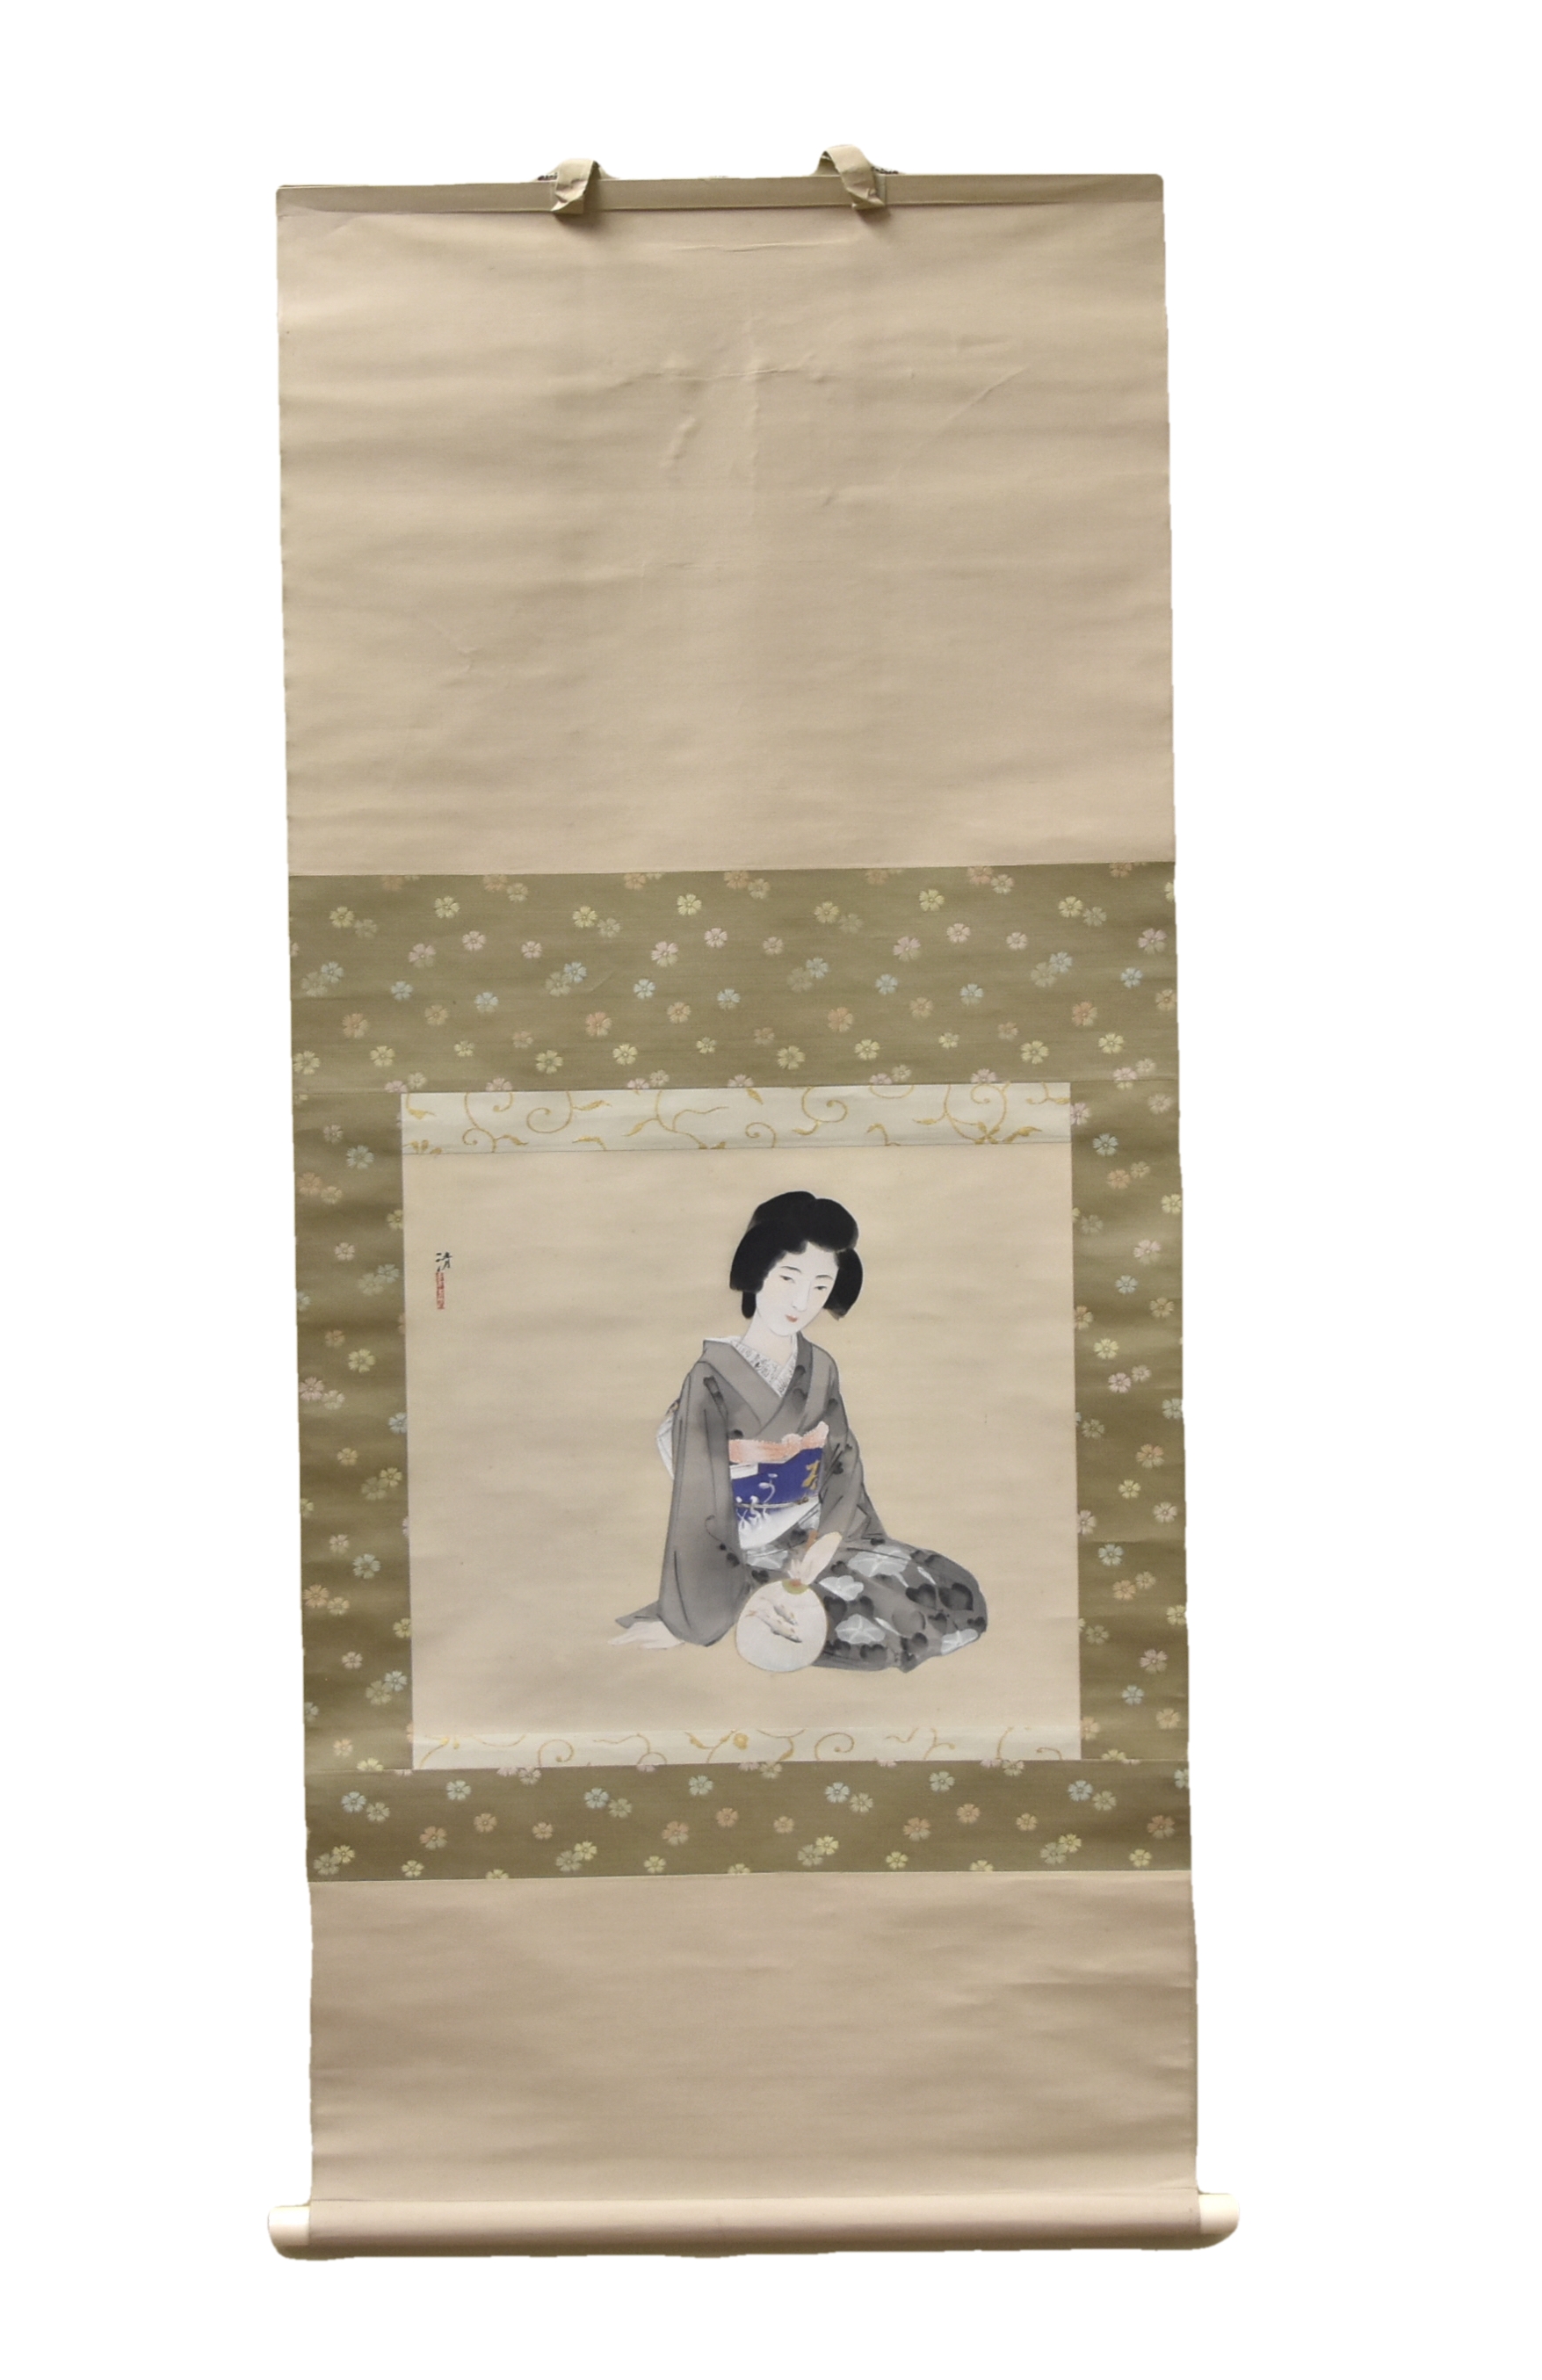 PAINTING OF A JAPANESE FEMALE FIGURE 3b6360